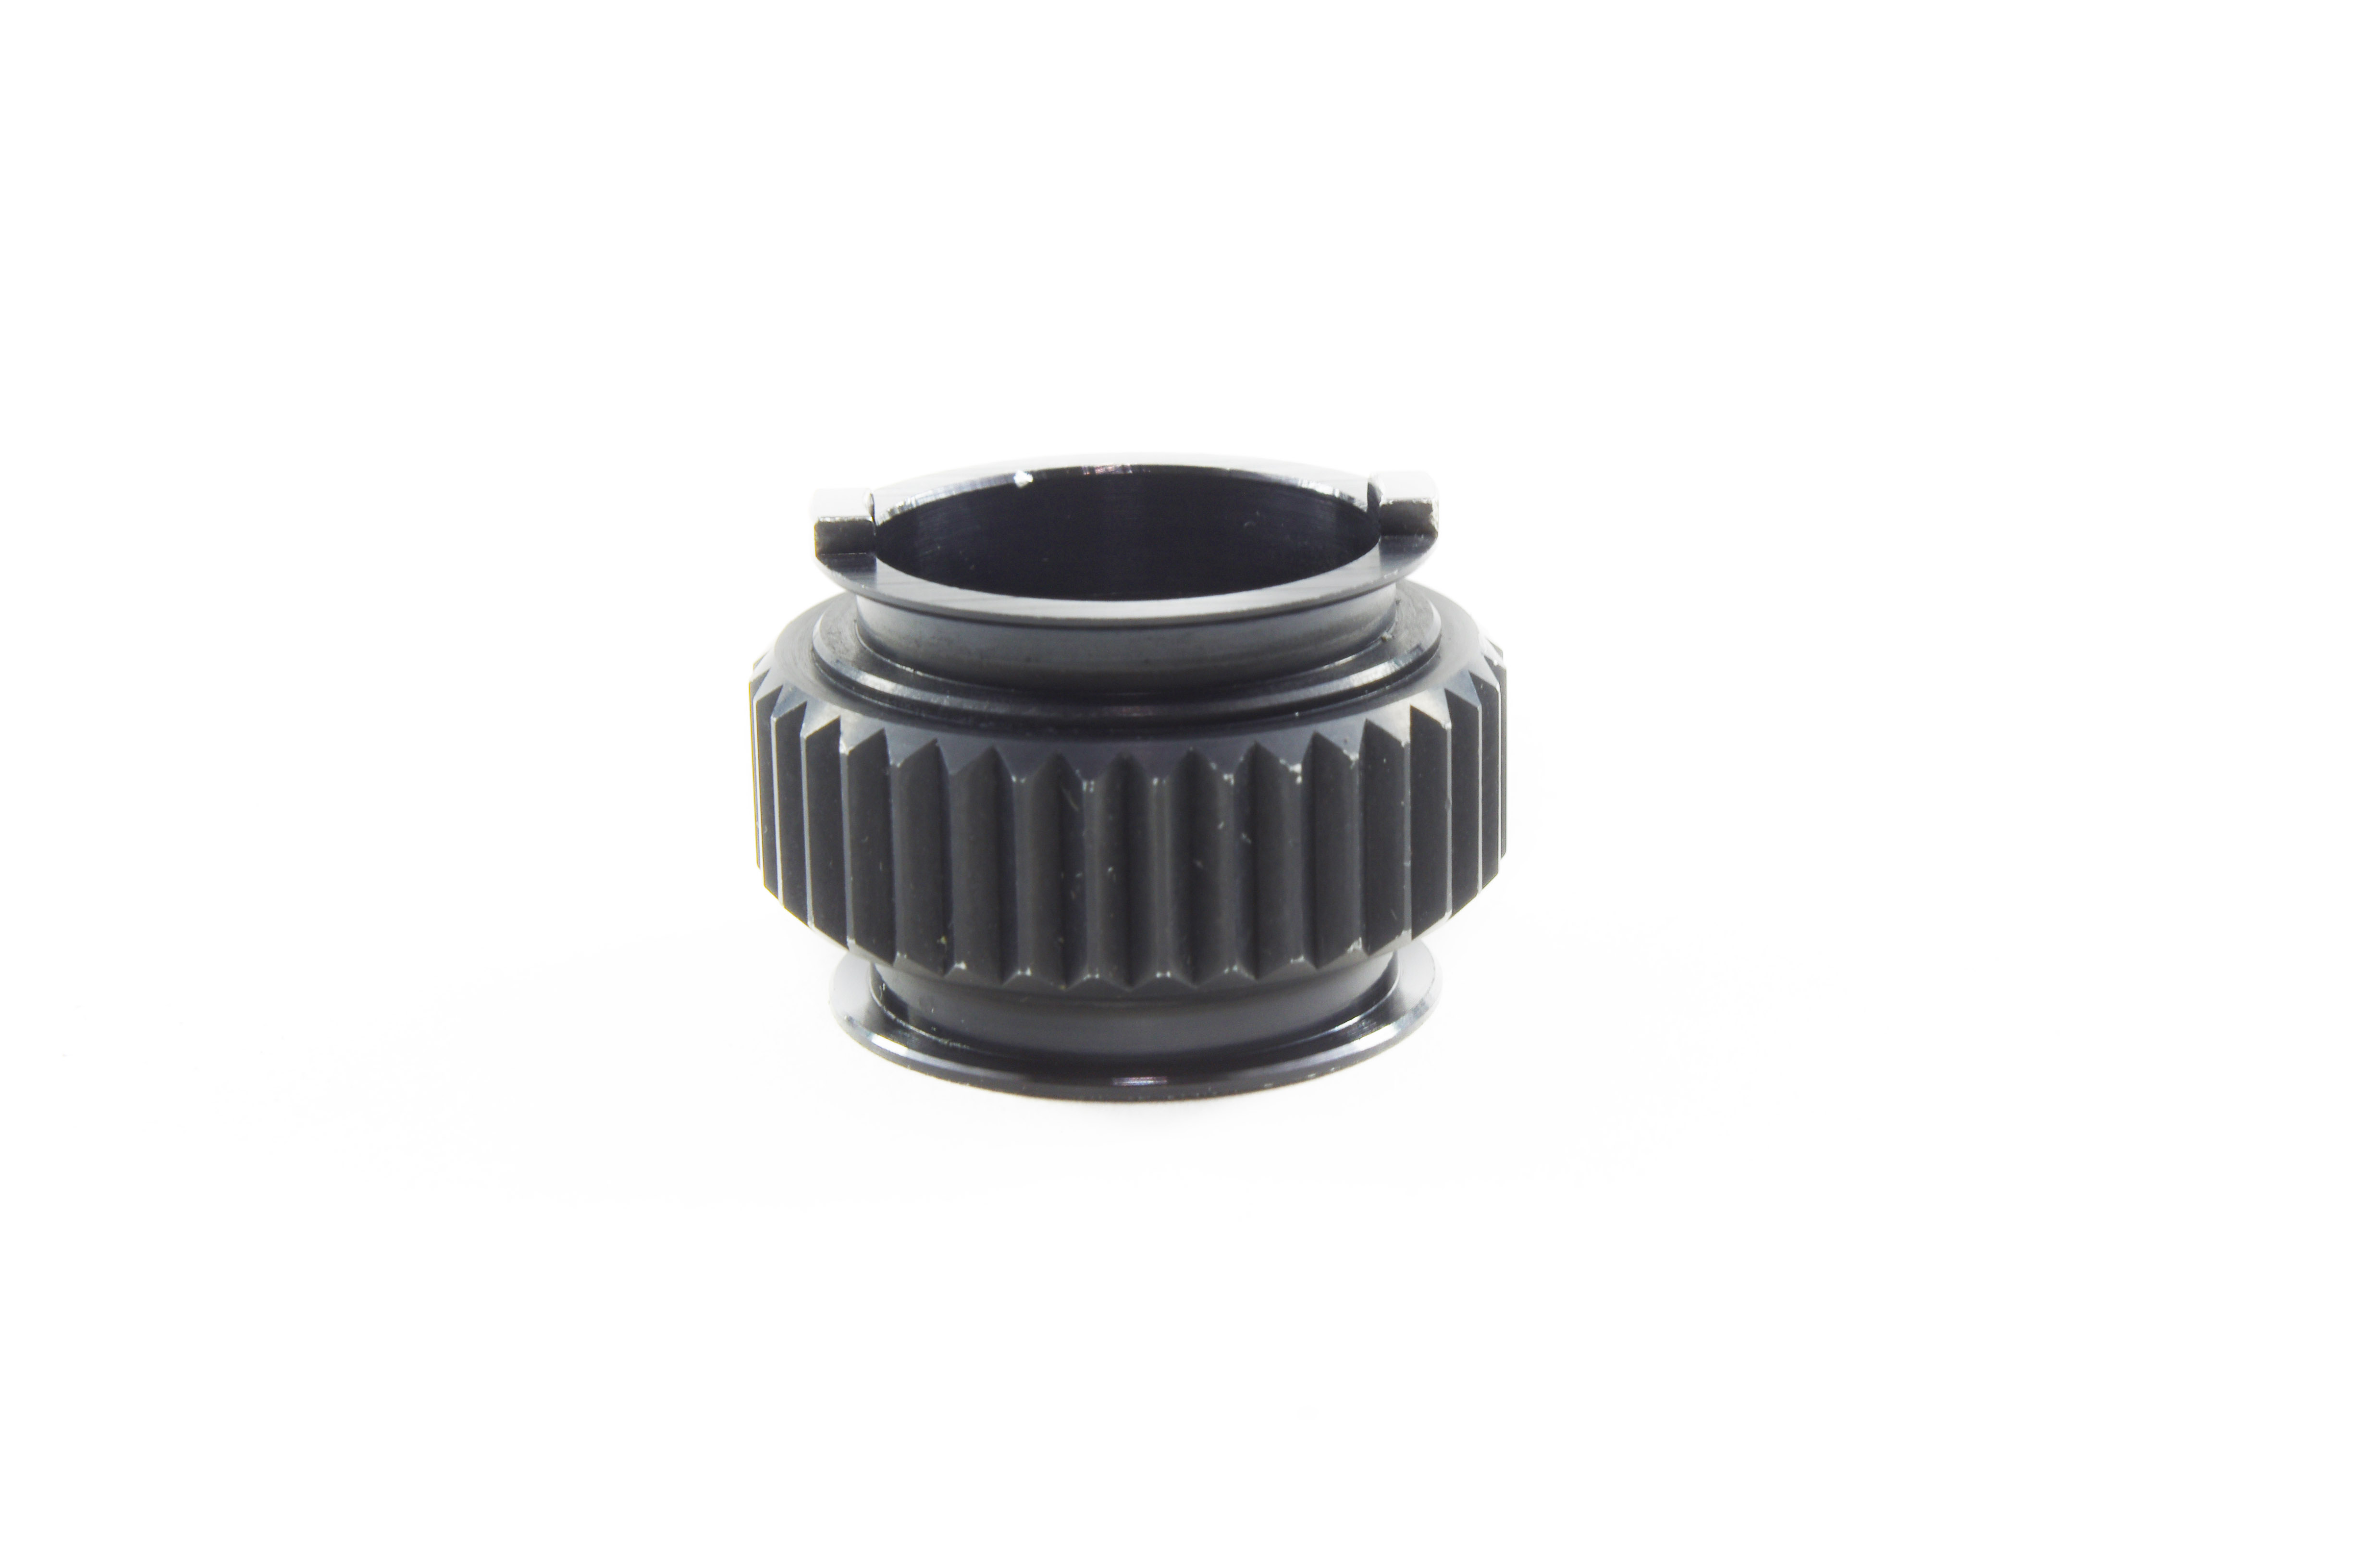 OEM Eyepiece Diopter Ring - LF-1, LF-2, LF-T, LF-P, ENF-P2, ENF-P3, ENF-XP